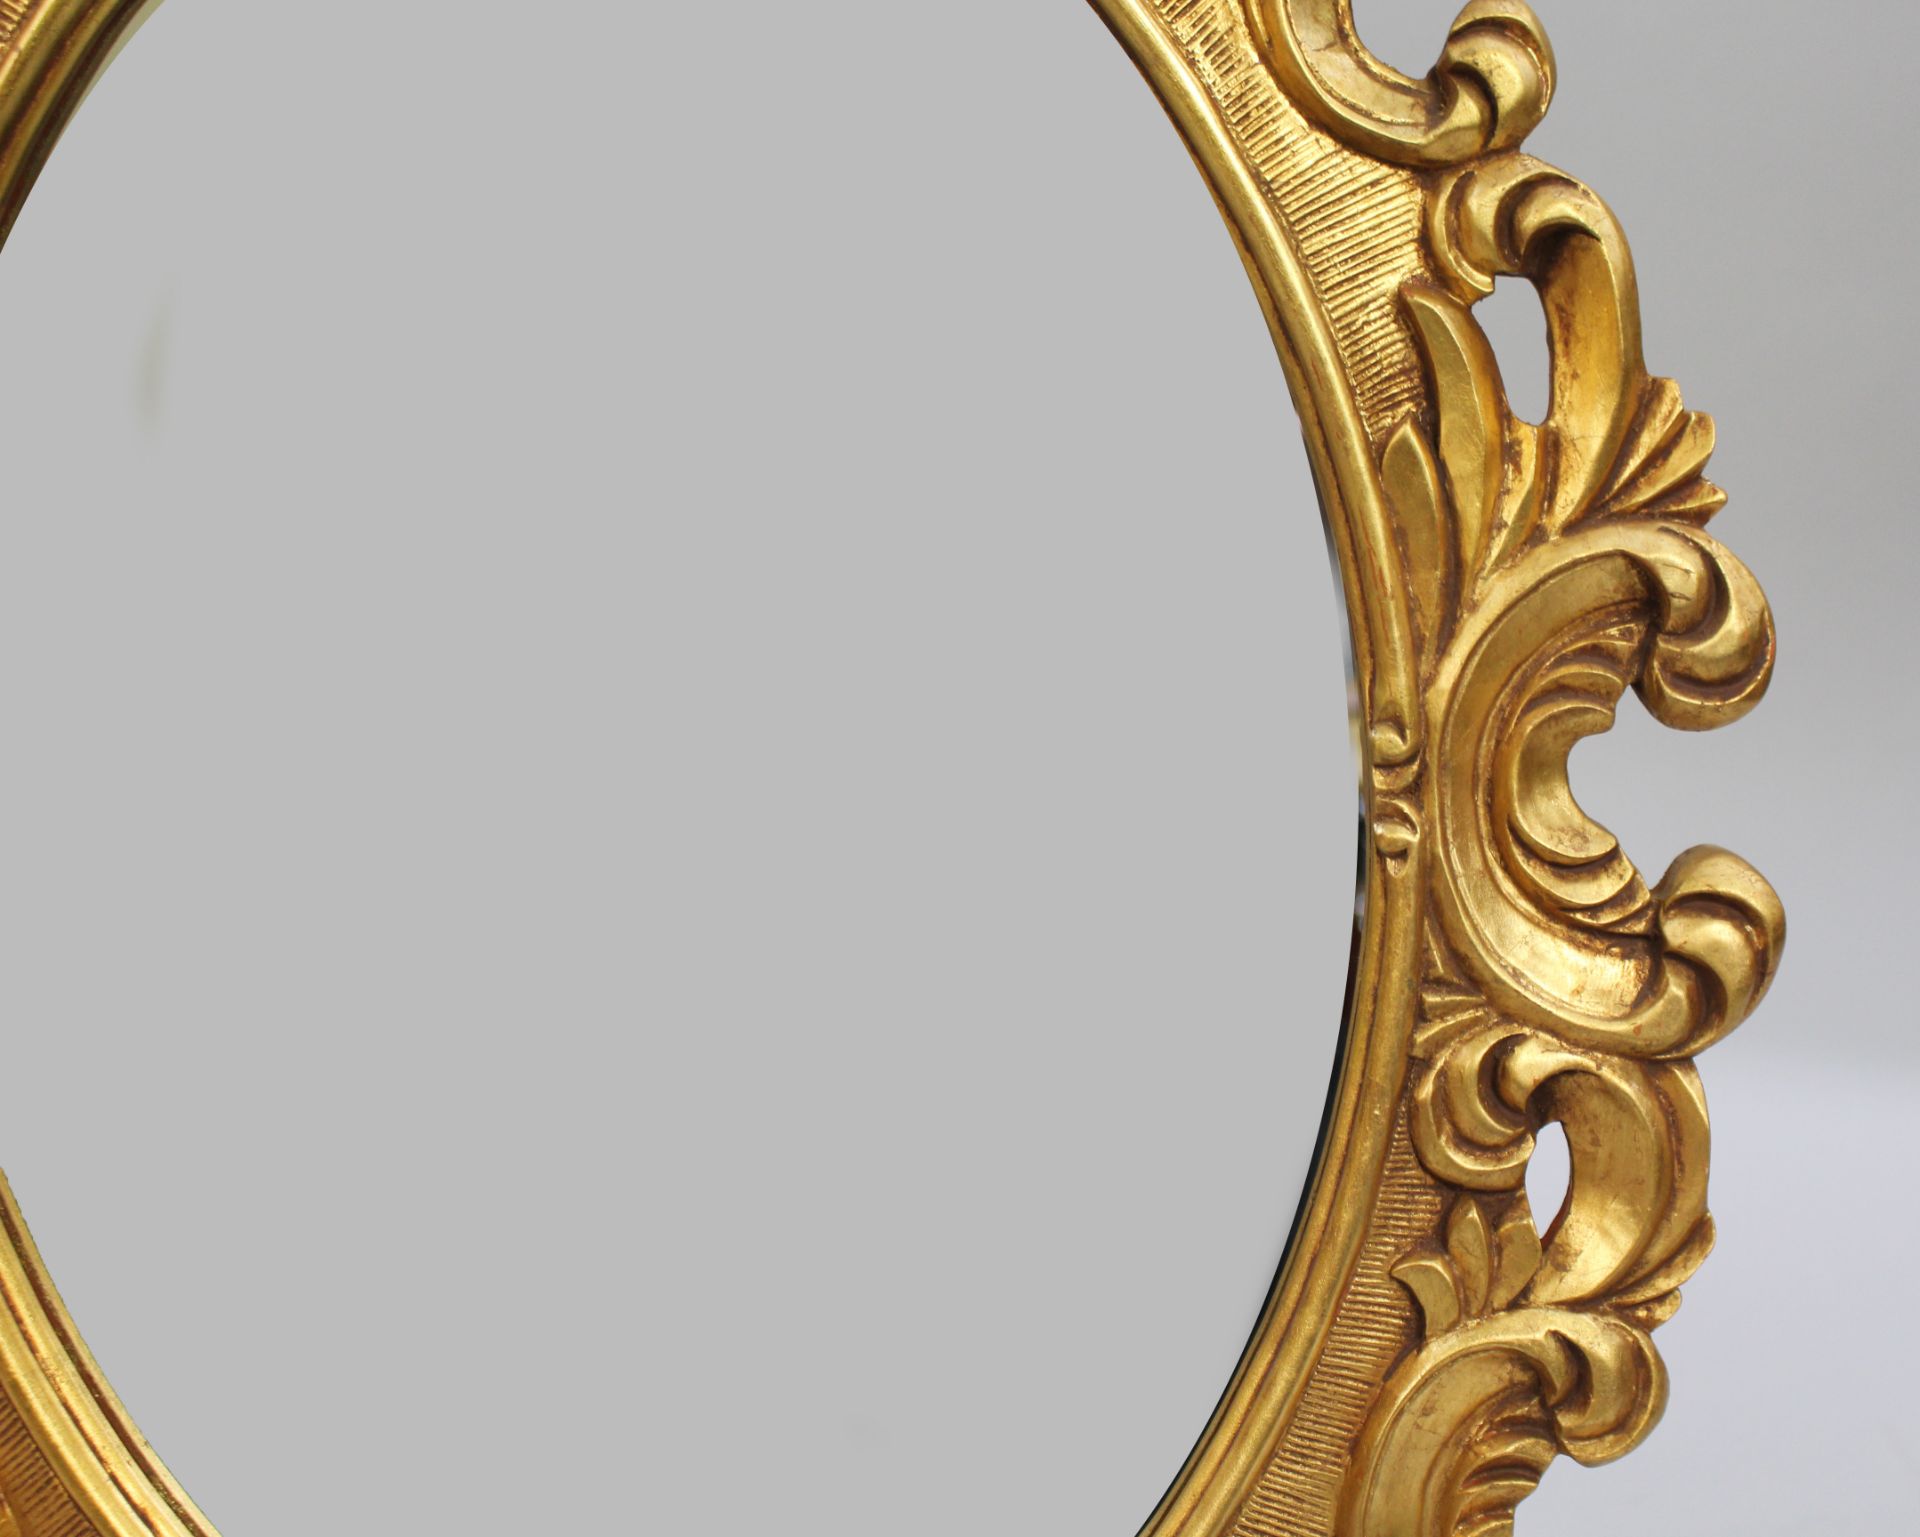 Carved Giltwood Wall Mirror - Image 3 of 5